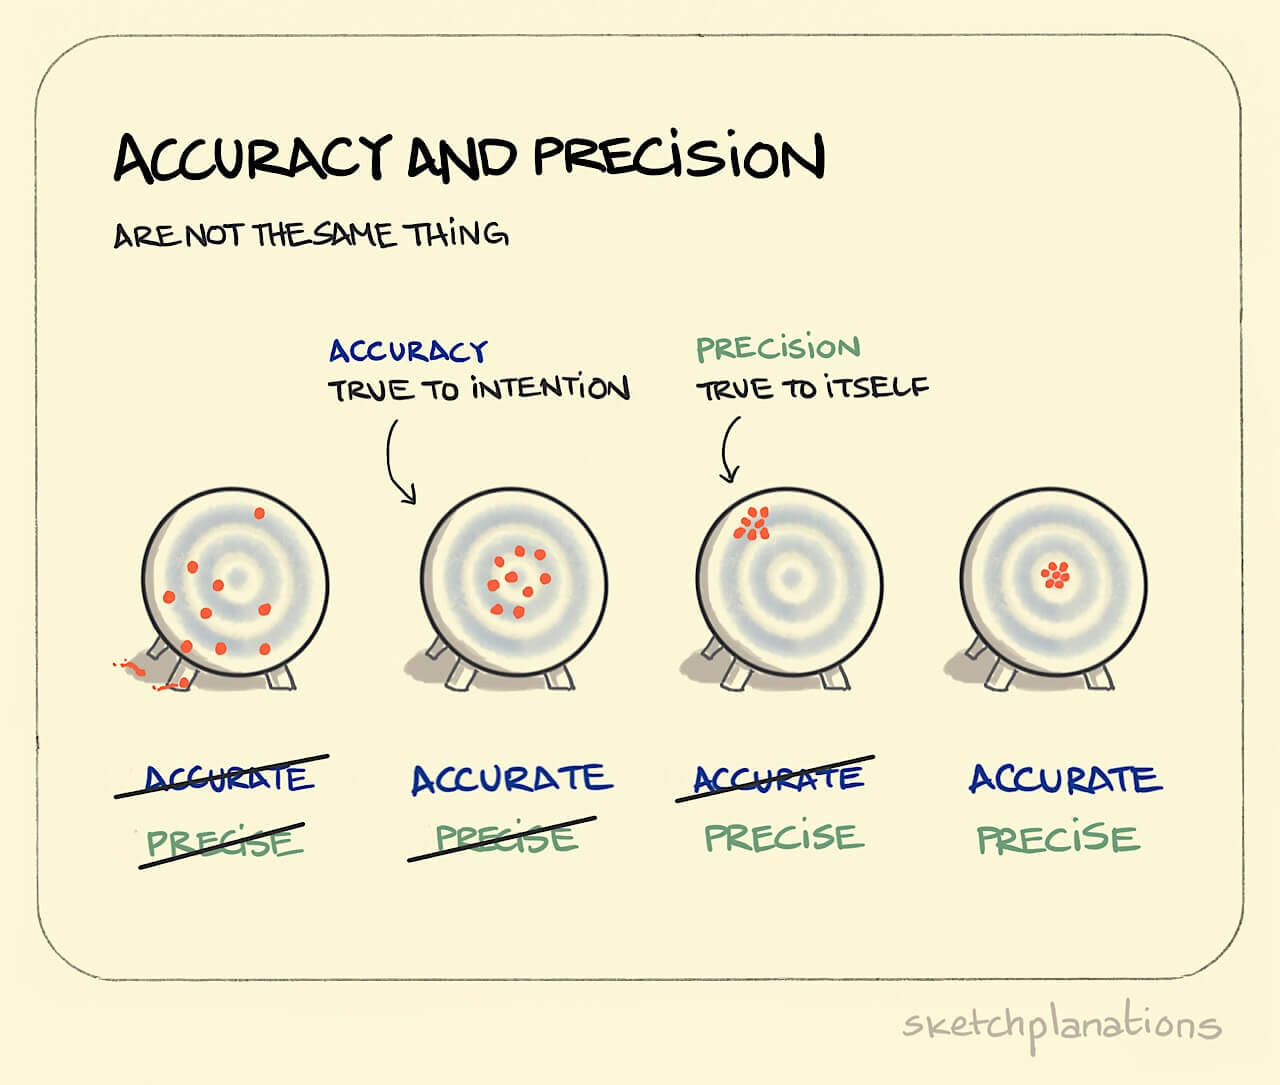 Accuracy and precision